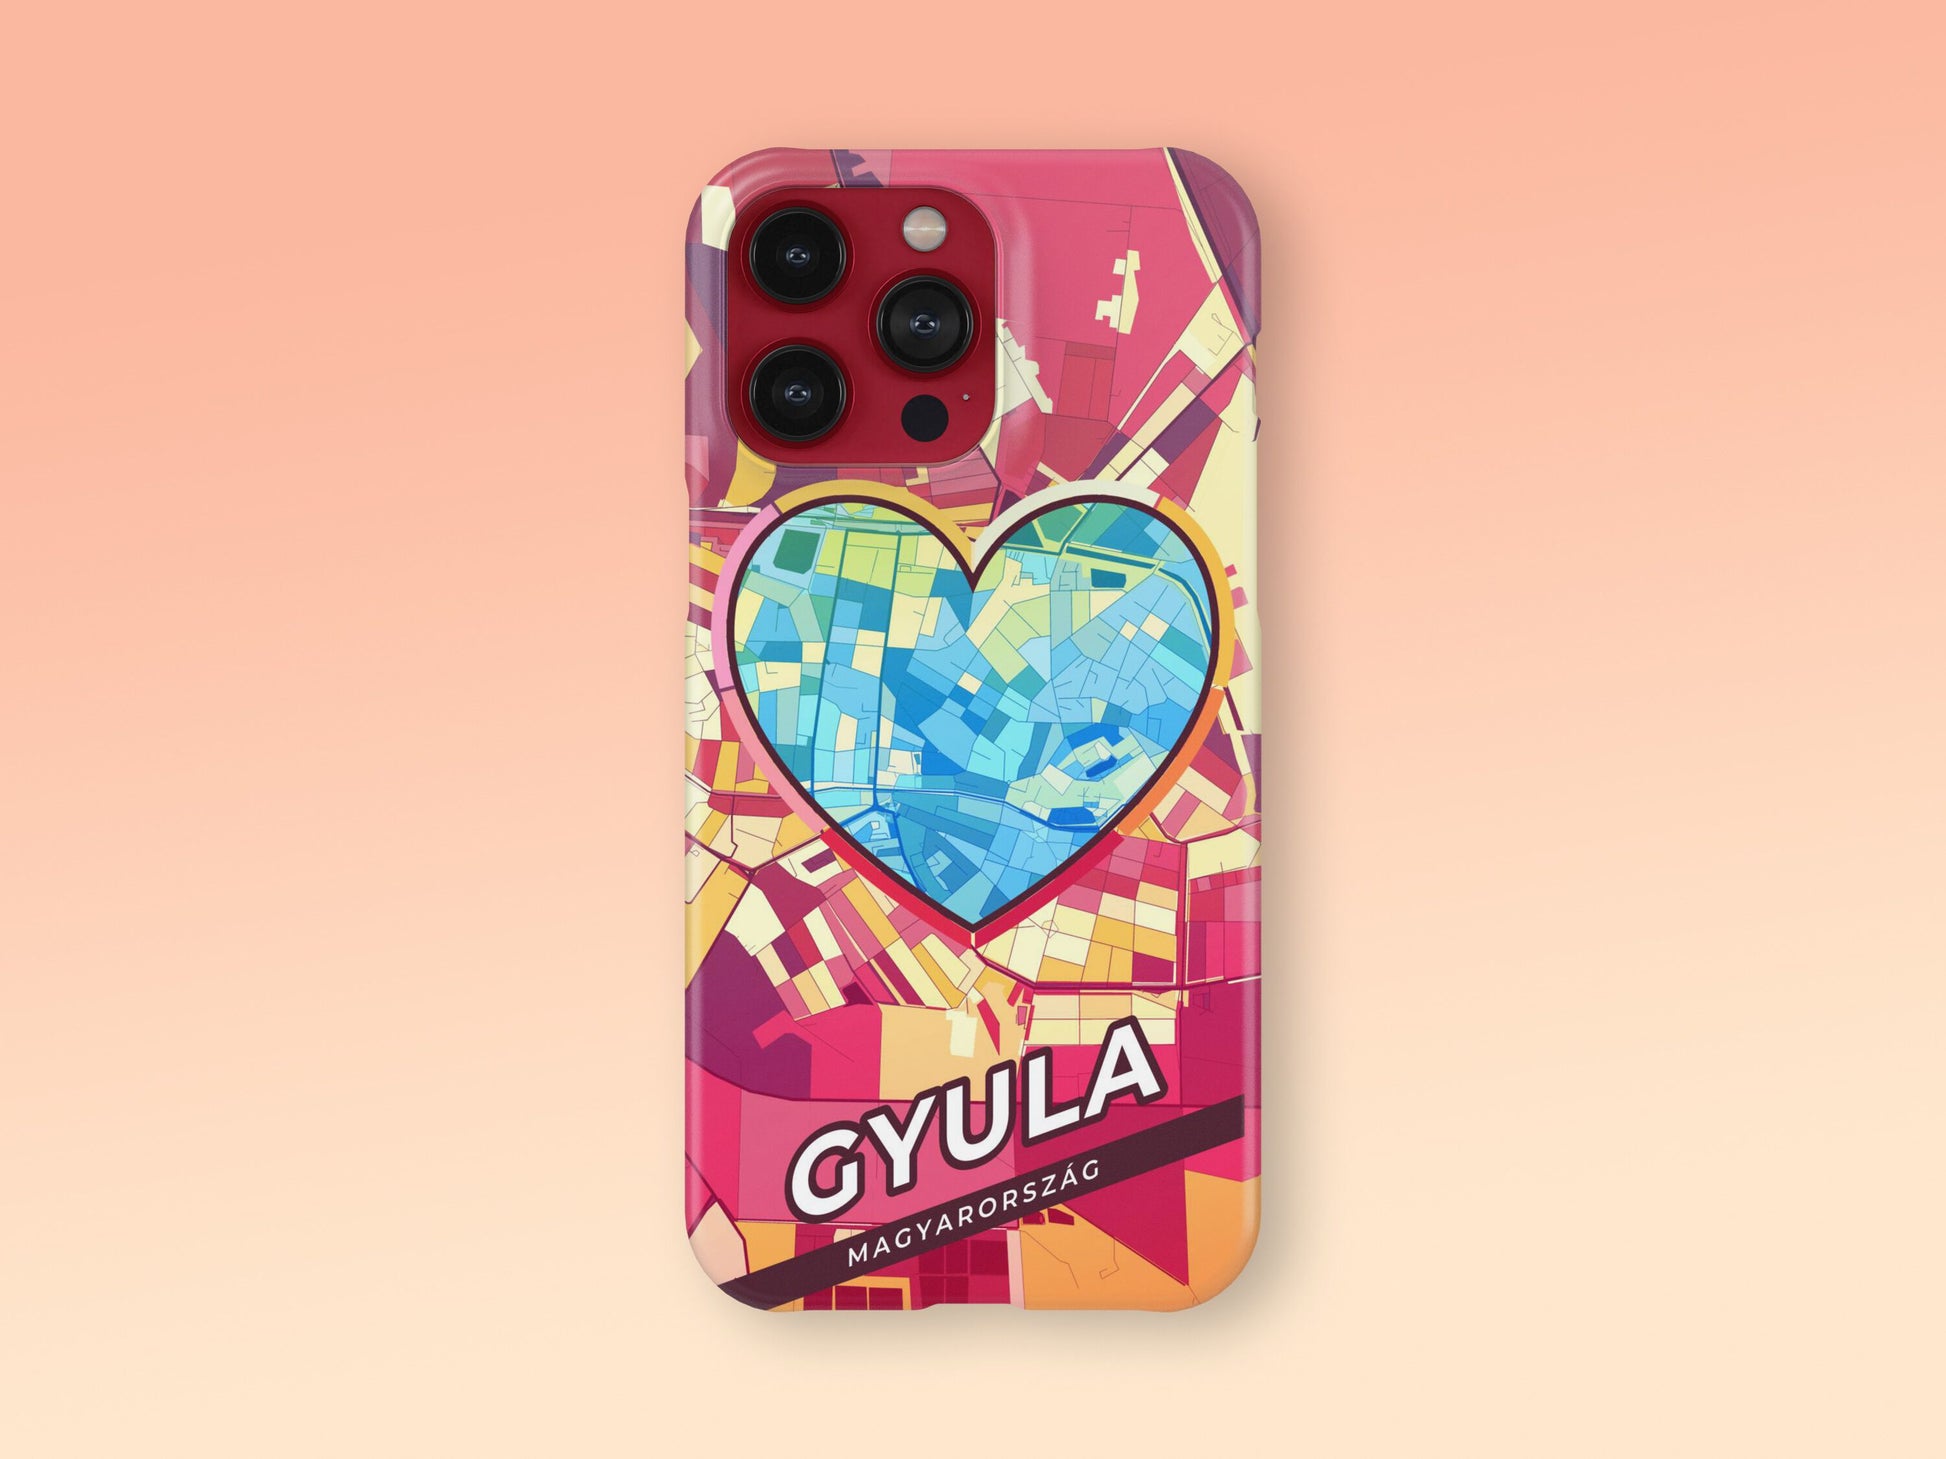 Gyula Hungary slim phone case with colorful icon. Birthday, wedding or housewarming gift. Couple match cases. 2